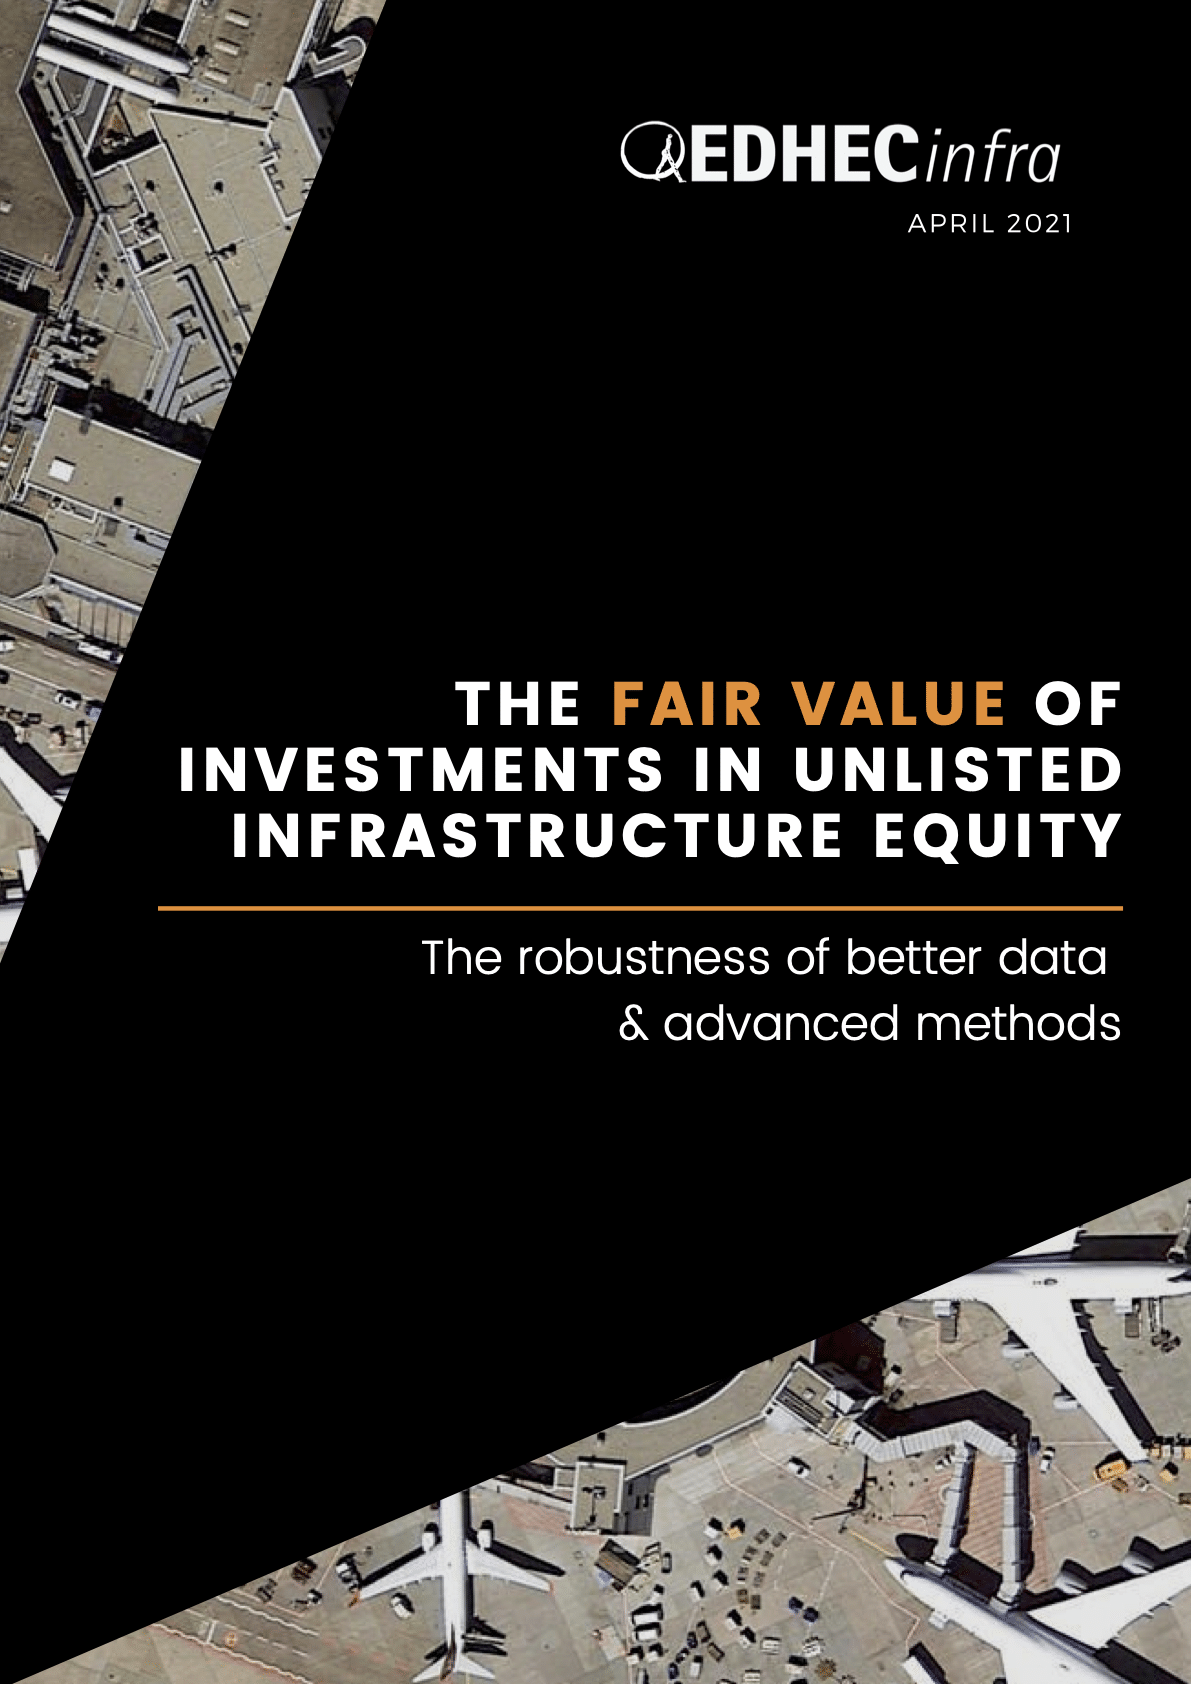 The Fair Value of Investments in Unlisted Infrastructure equity